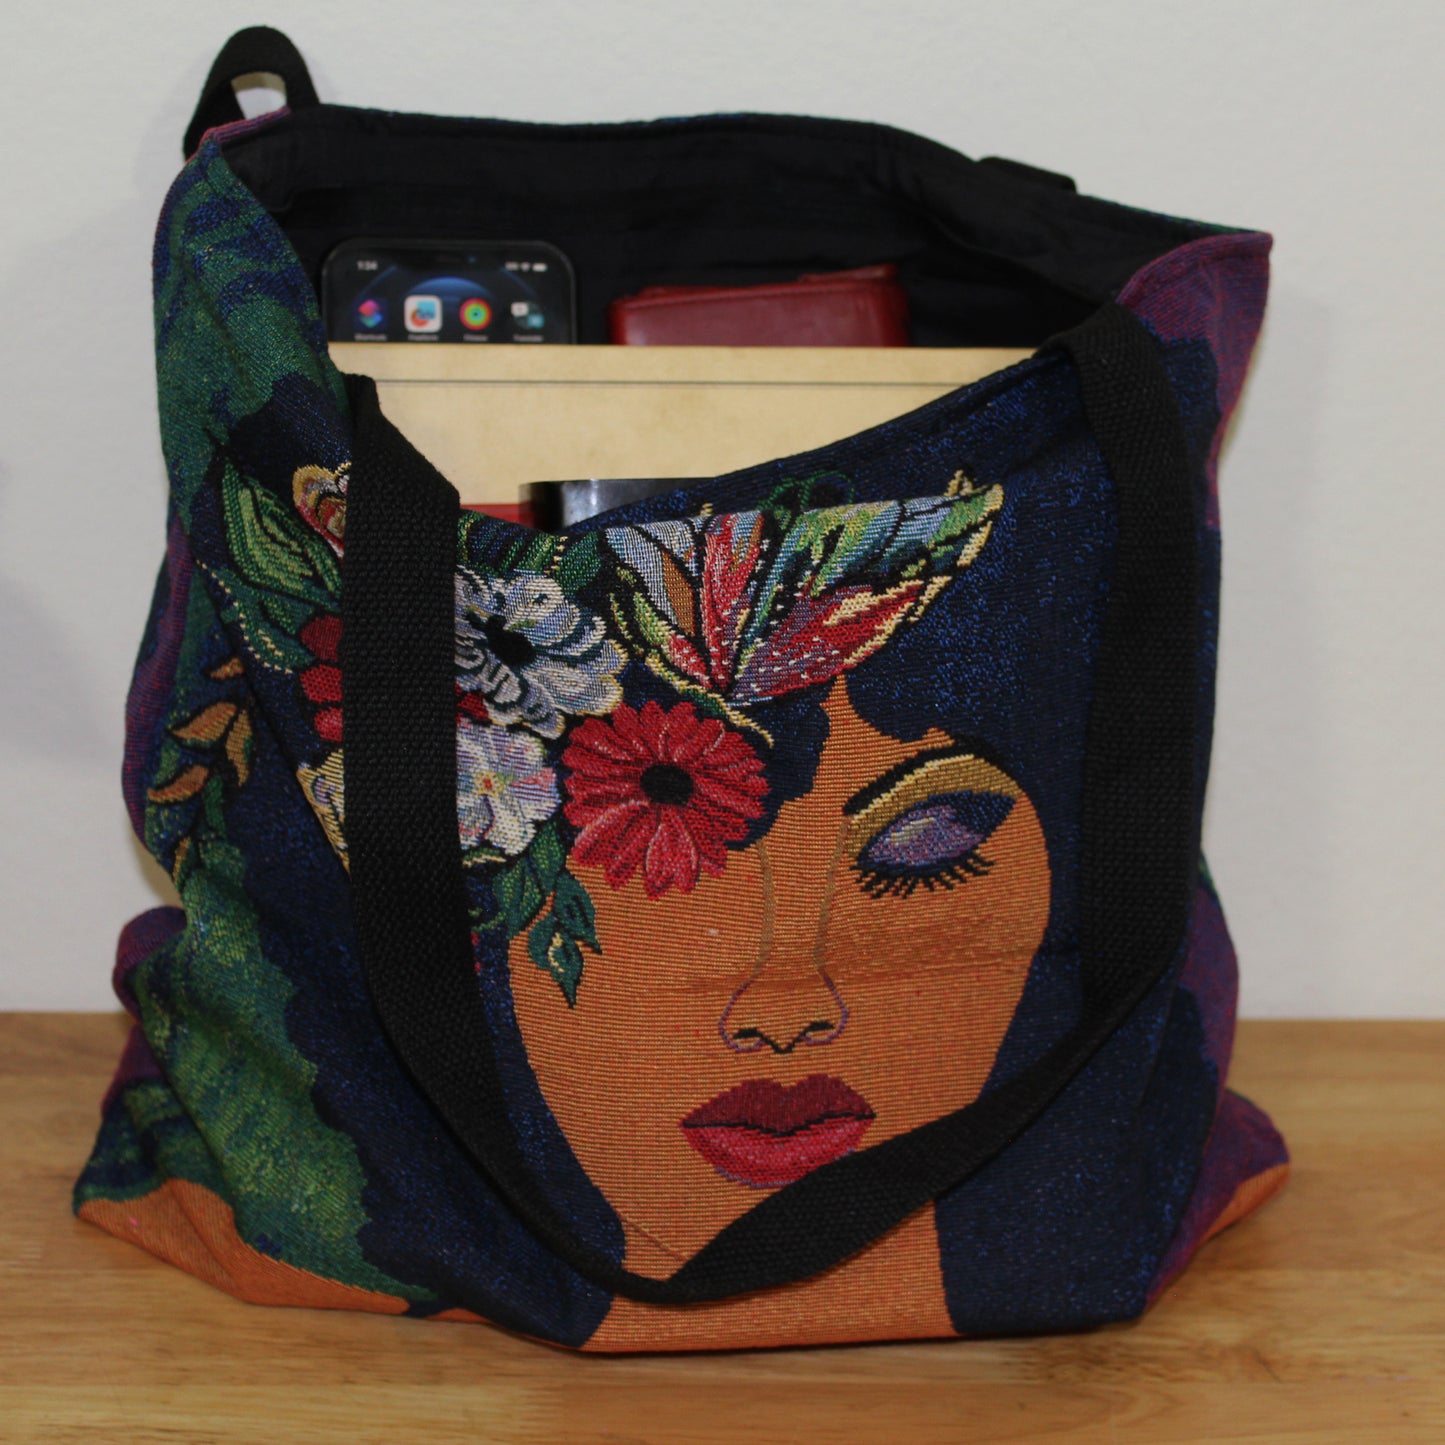 Believe, Blossom & Become Woven Tote with 2 pockets filled